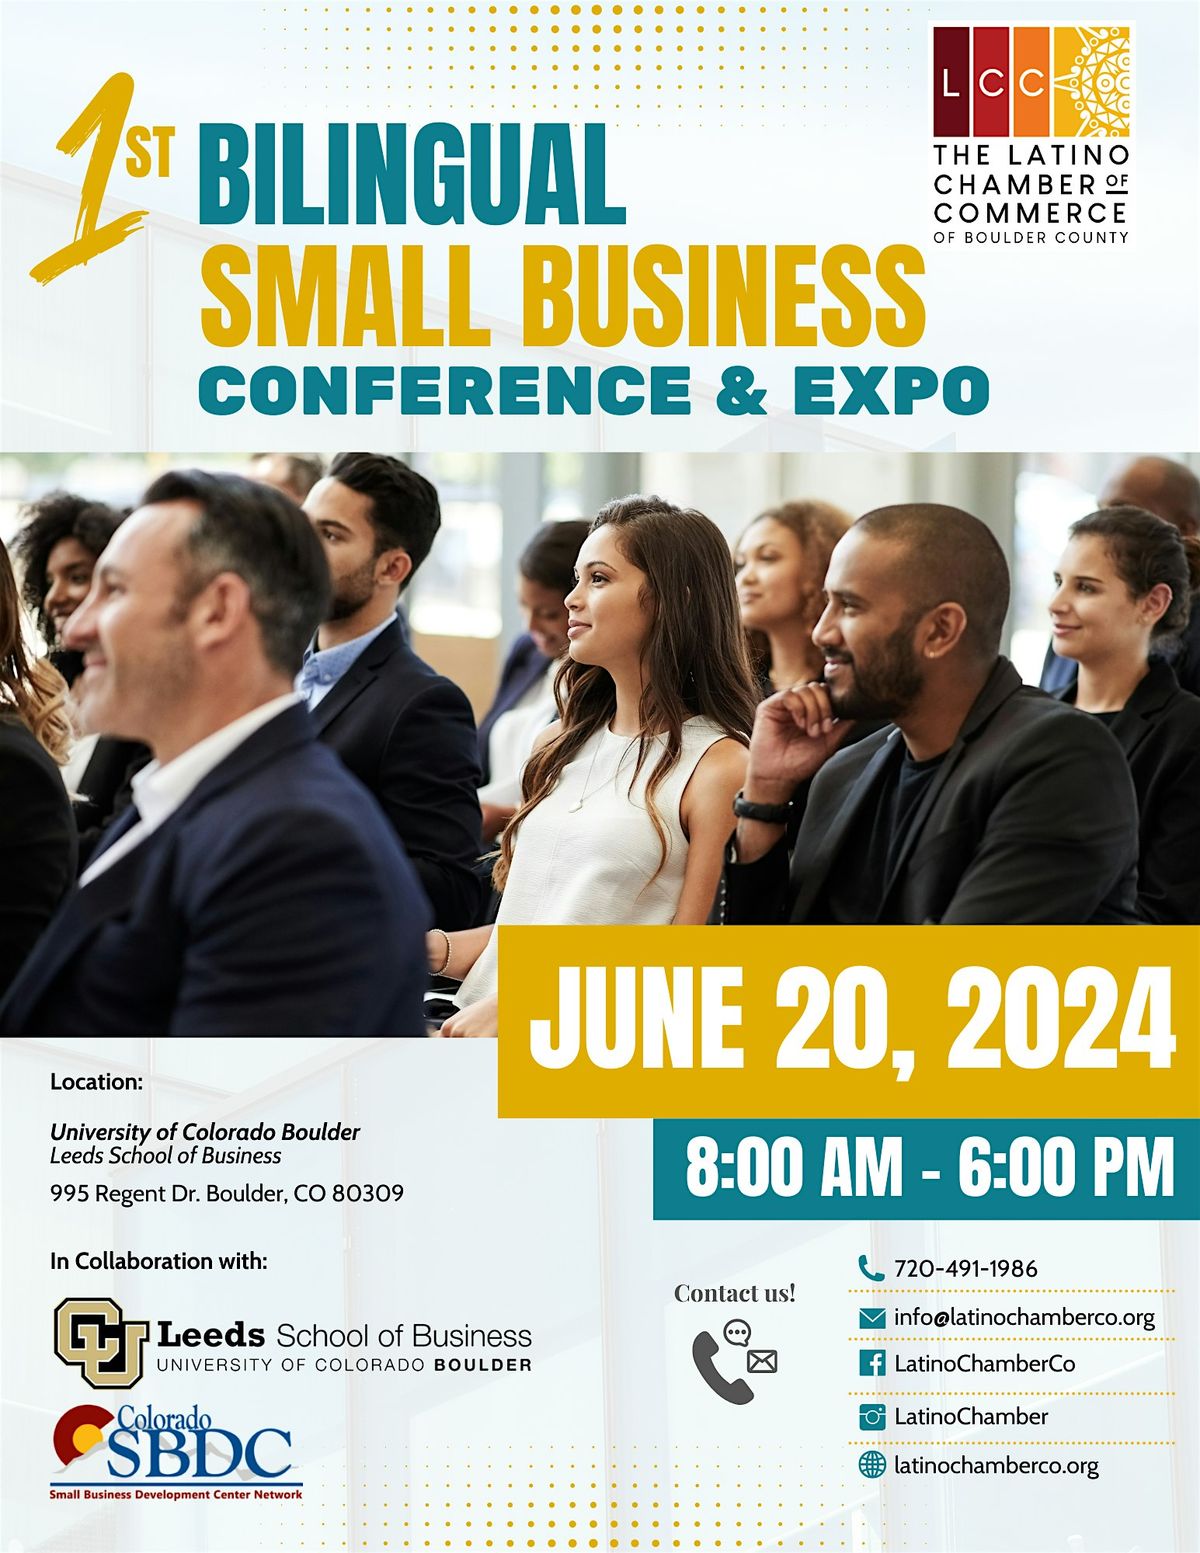 Bilingual Small Business Conference